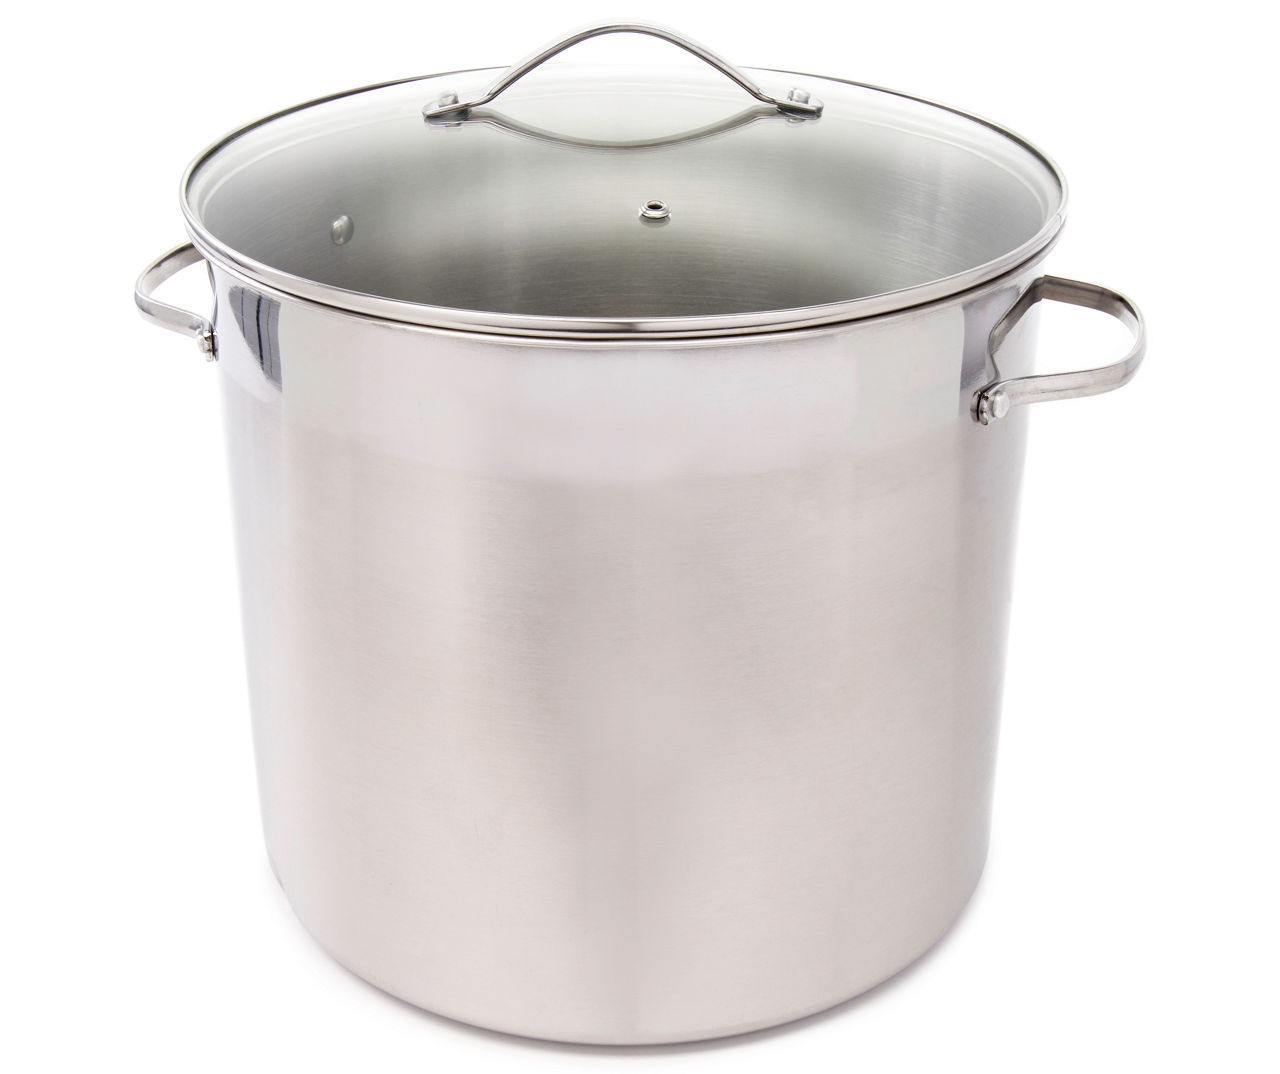 Great Gatherings Stainless Steel Stock Pots - 4 Sizes